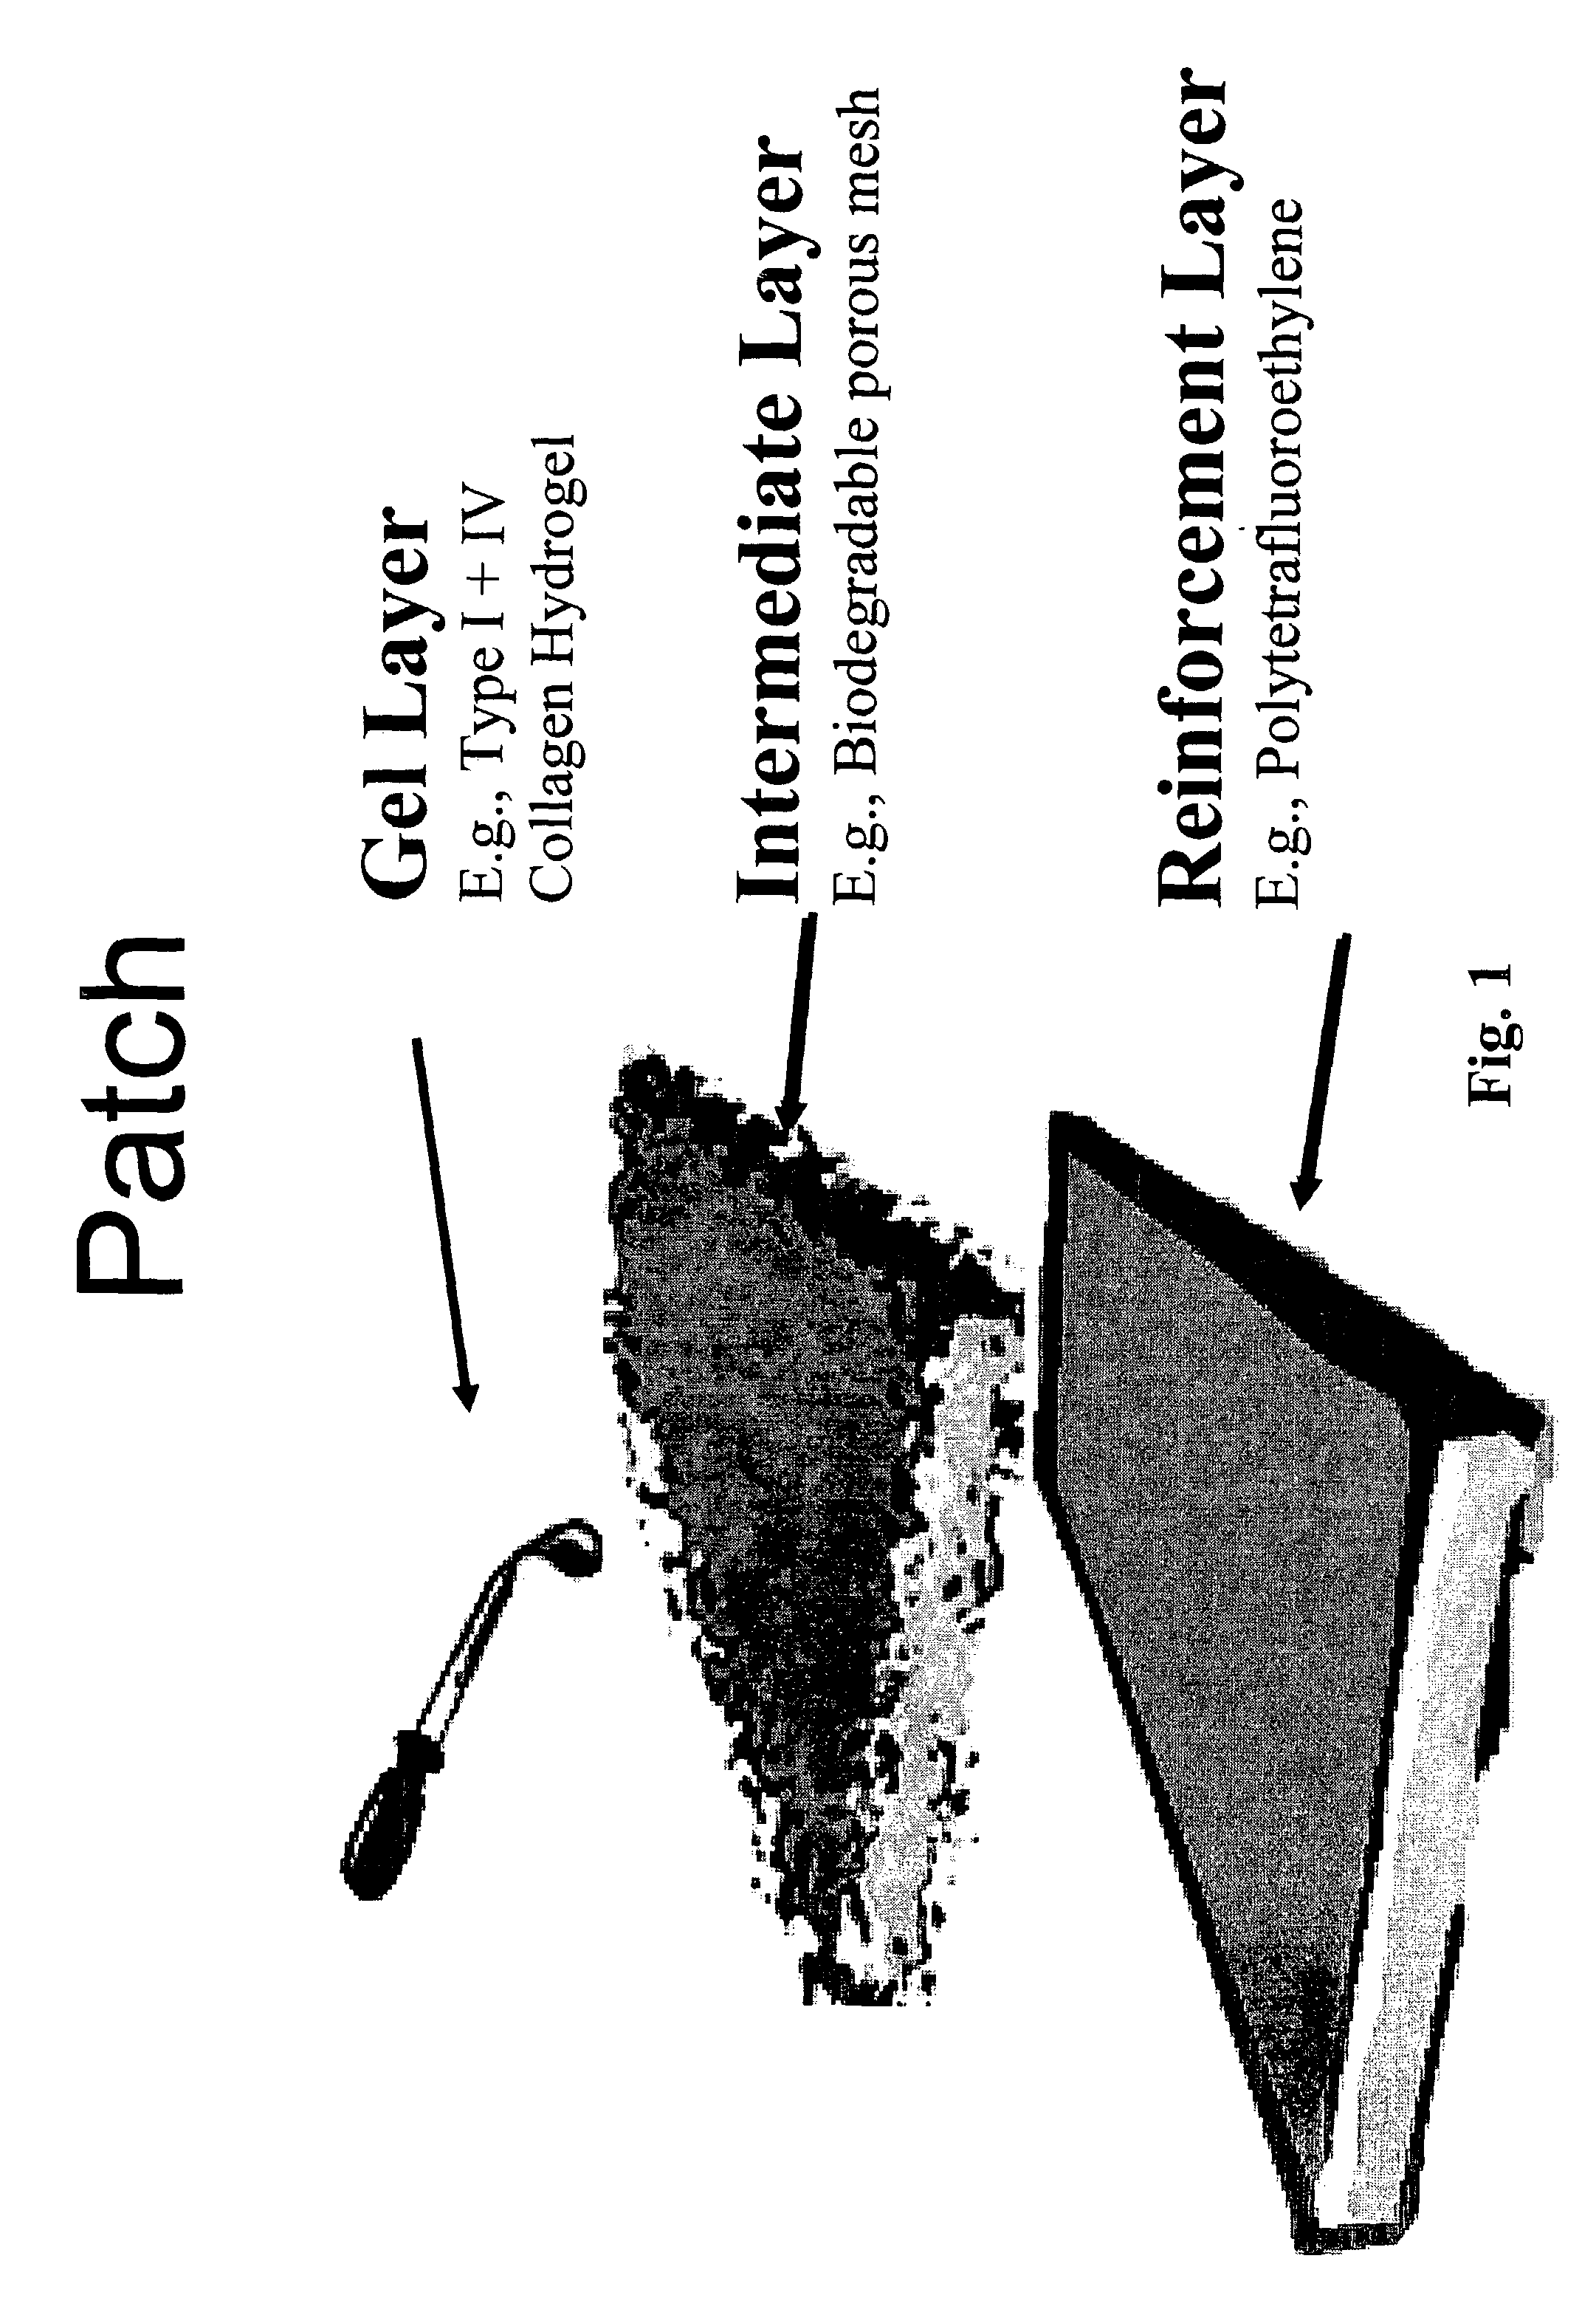 Cell delivery patch for myocardial tissue engineering